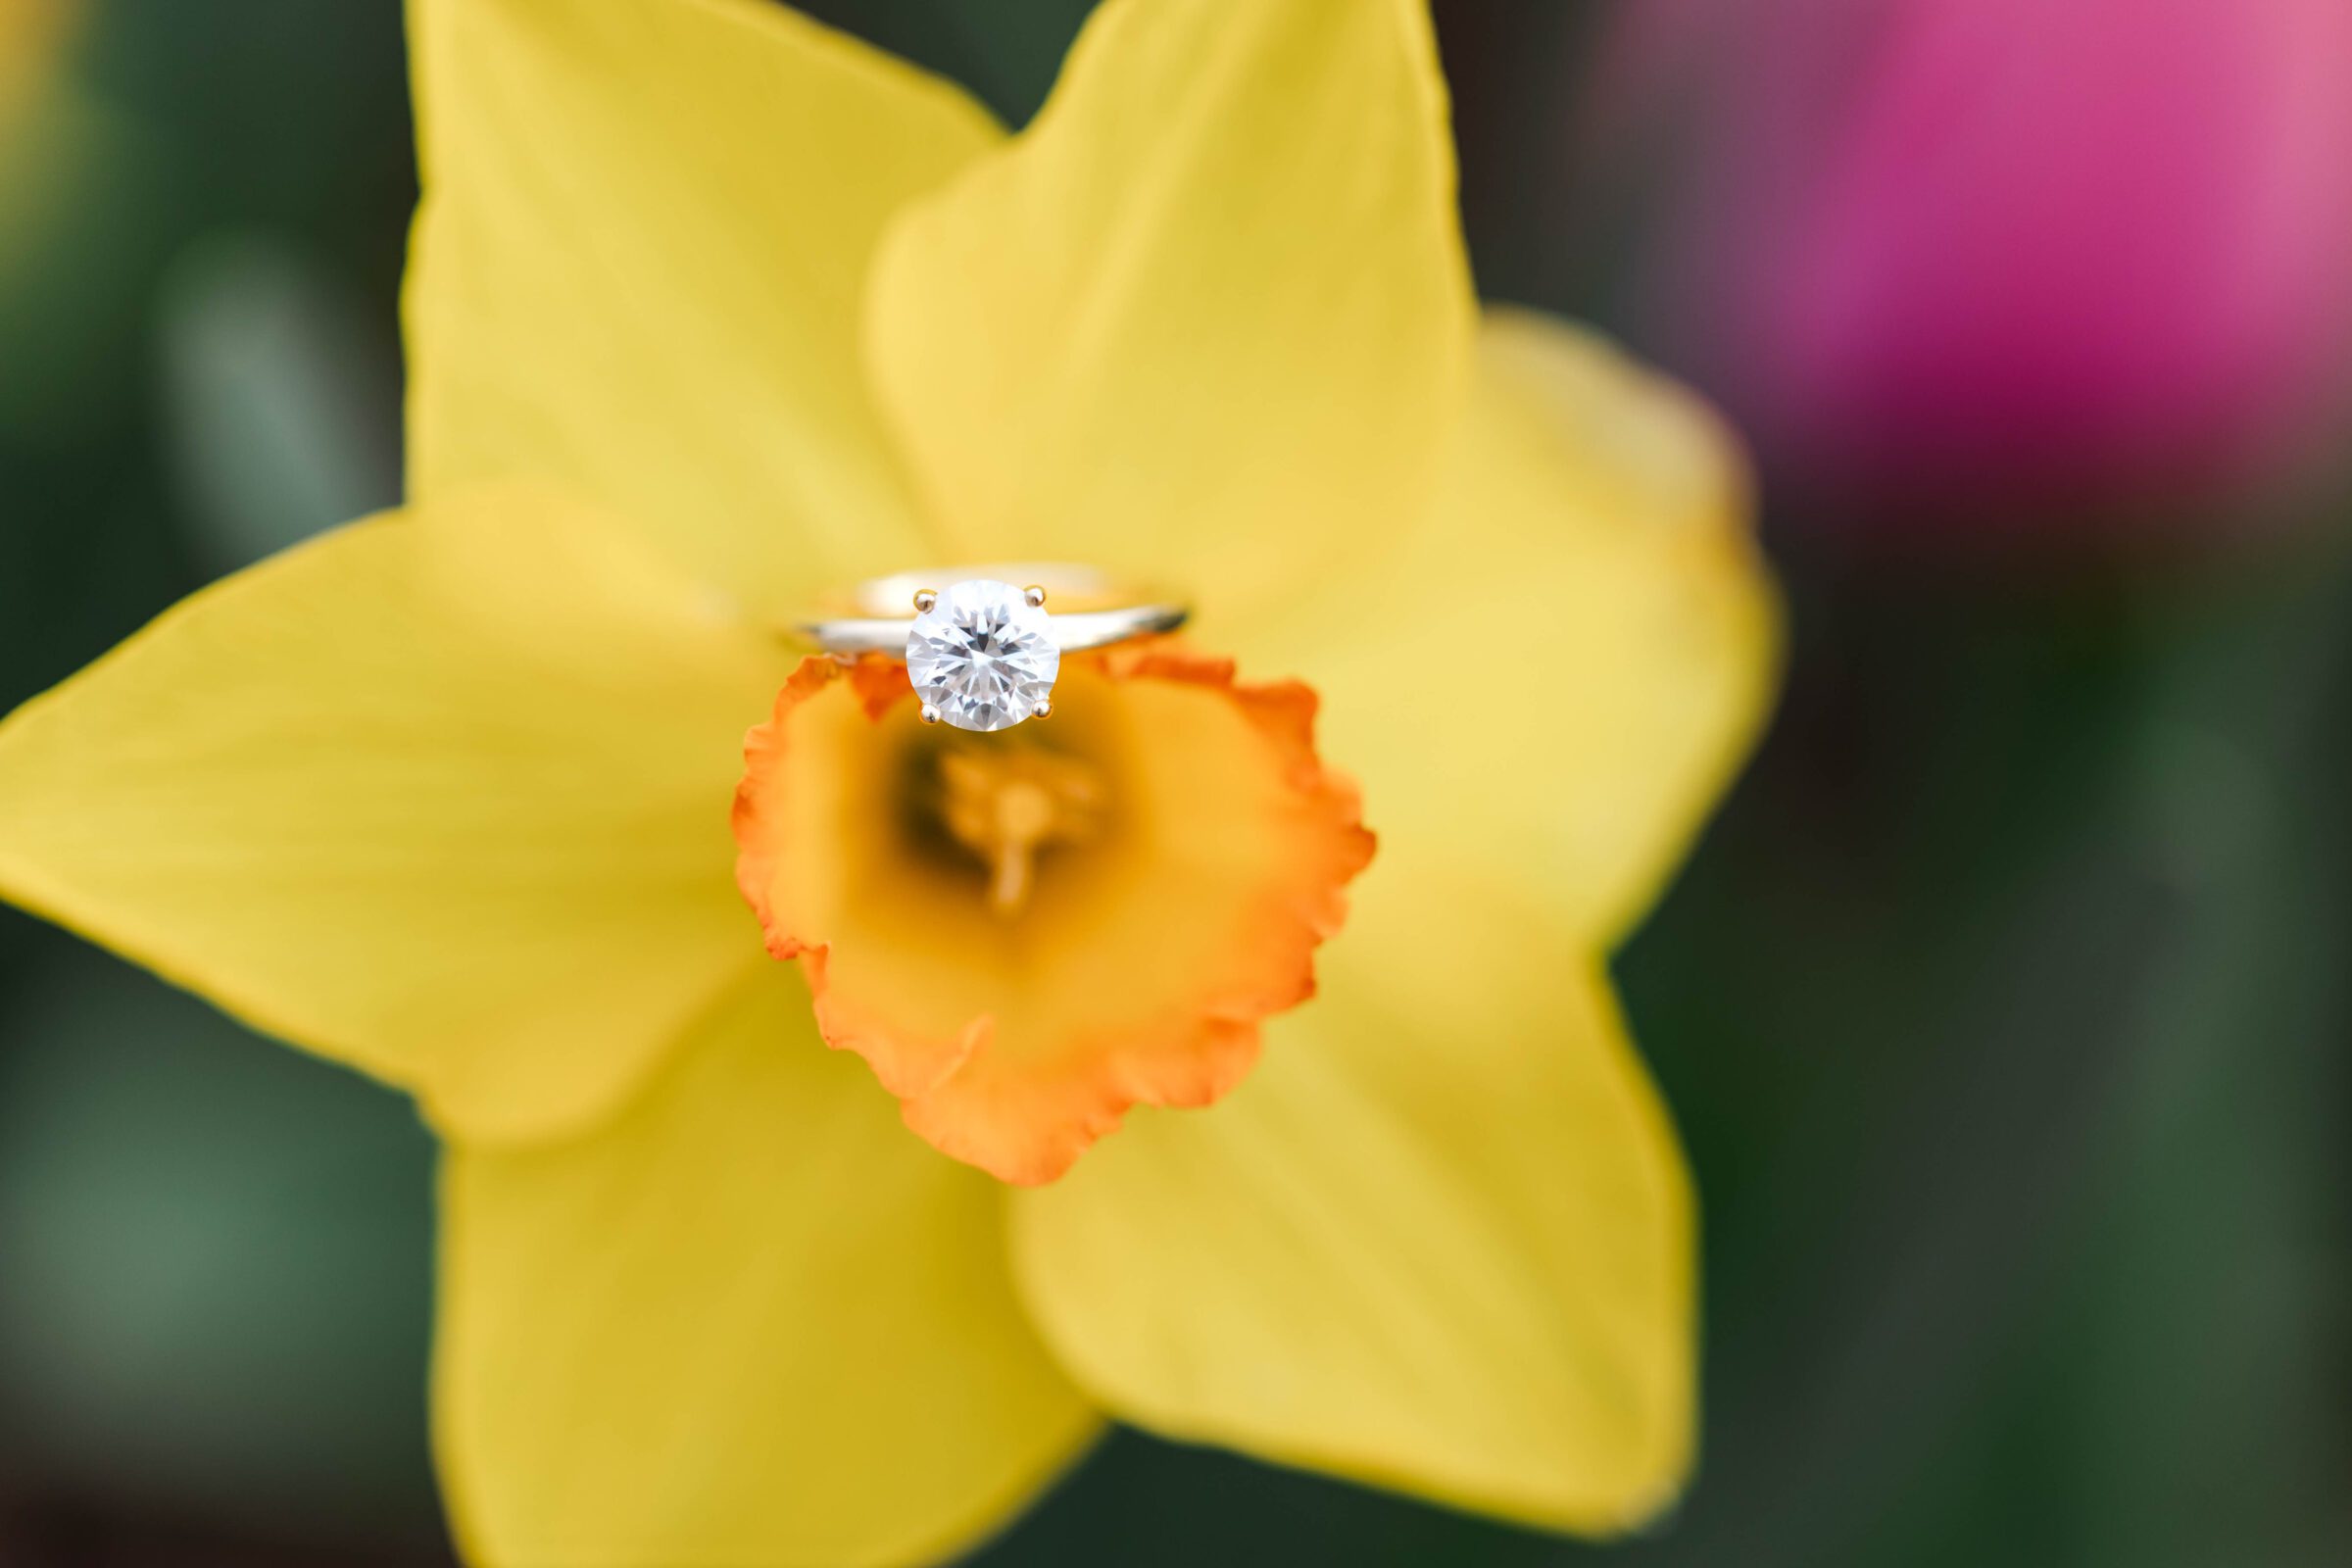 Image of ring in yellow flower - a lovely image to add to your wedding album!